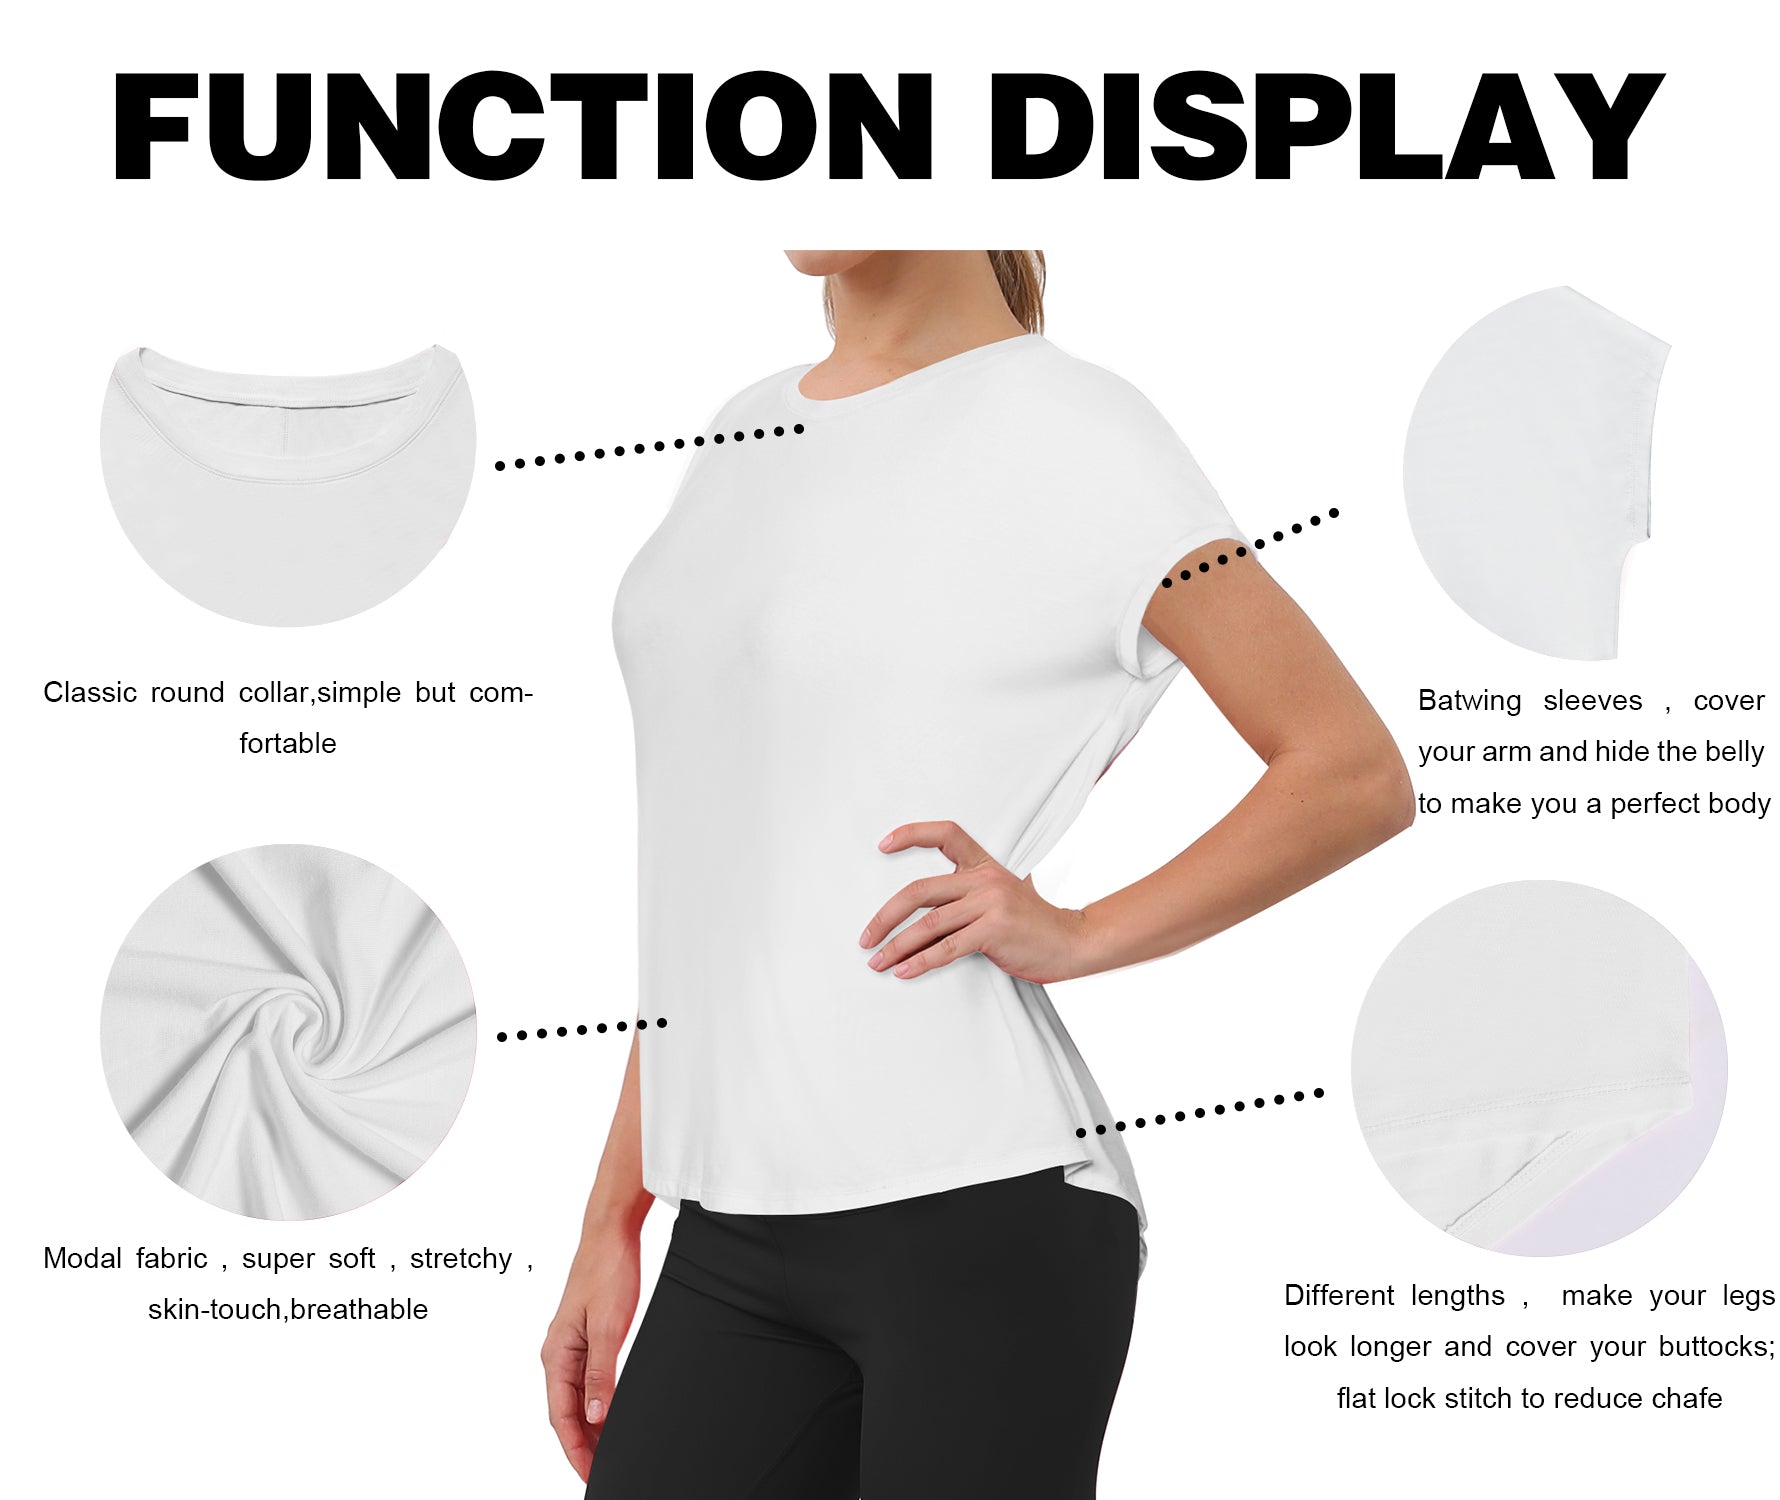 Hip Length Short Sleeve Shirt white 93%Modal/7%Spandex Designed for Running Classic Fit, Hip Length An easy fit that floats away from your body Sits below the waistband for moderate, everyday coverage Lightweight, elastic, strong fabric for moisture absorption and perspiration, sports and fitness clothing.